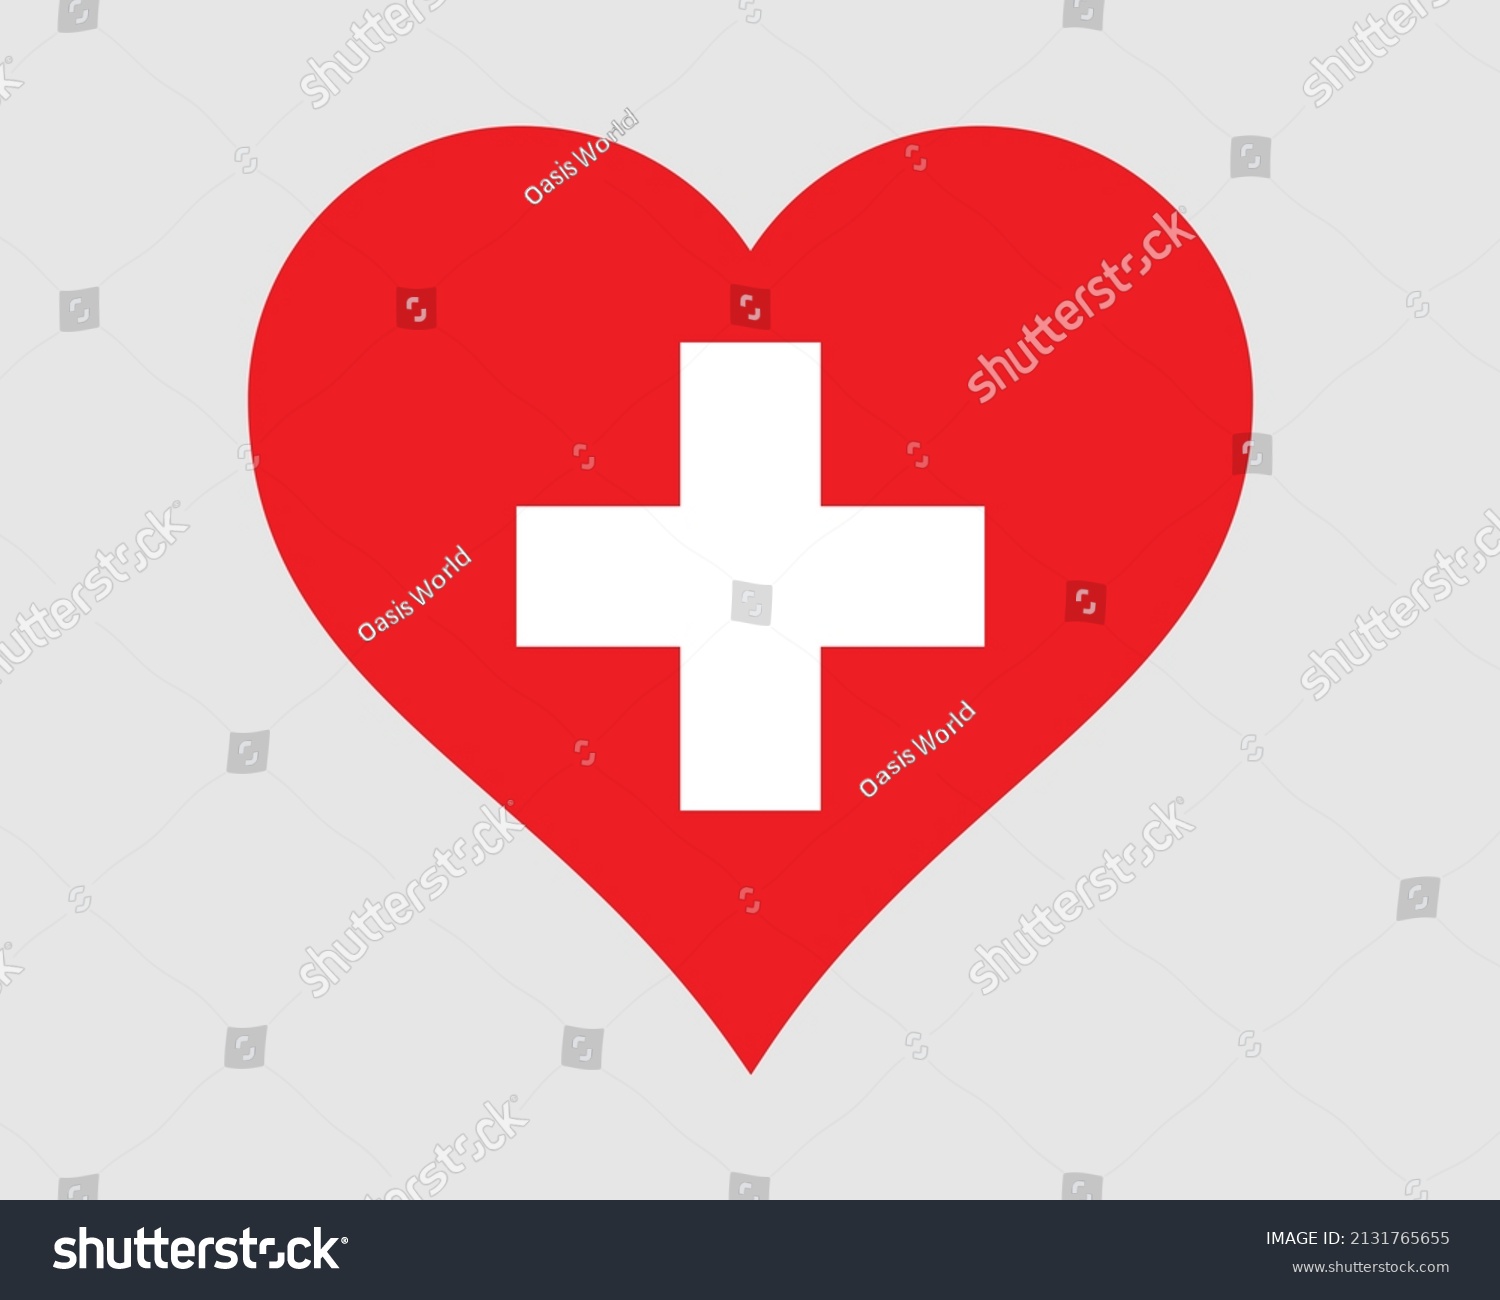 SVG of Switzerland Heart Flag. Swiss Love Shape Country Nation National Flag. Swiss Confederation Banner Icon Sign Symbol. EPS Vector Illustration. svg